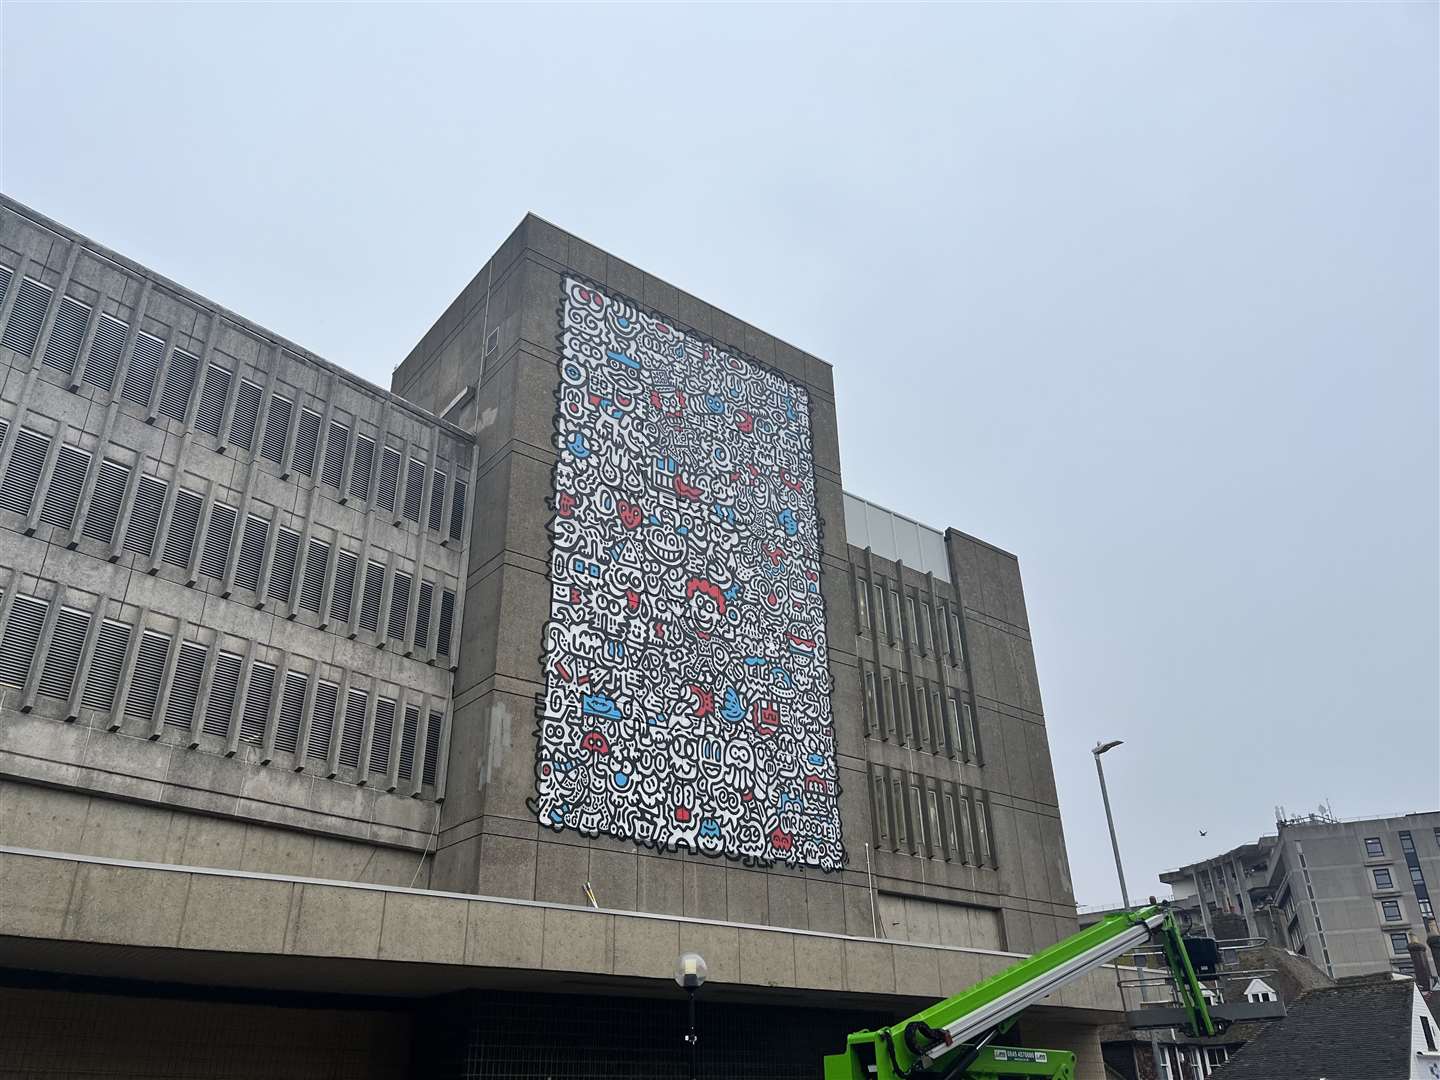 Mr Doodle finished his project, on the side of the Edinburgh Road car park in Ashford, last week